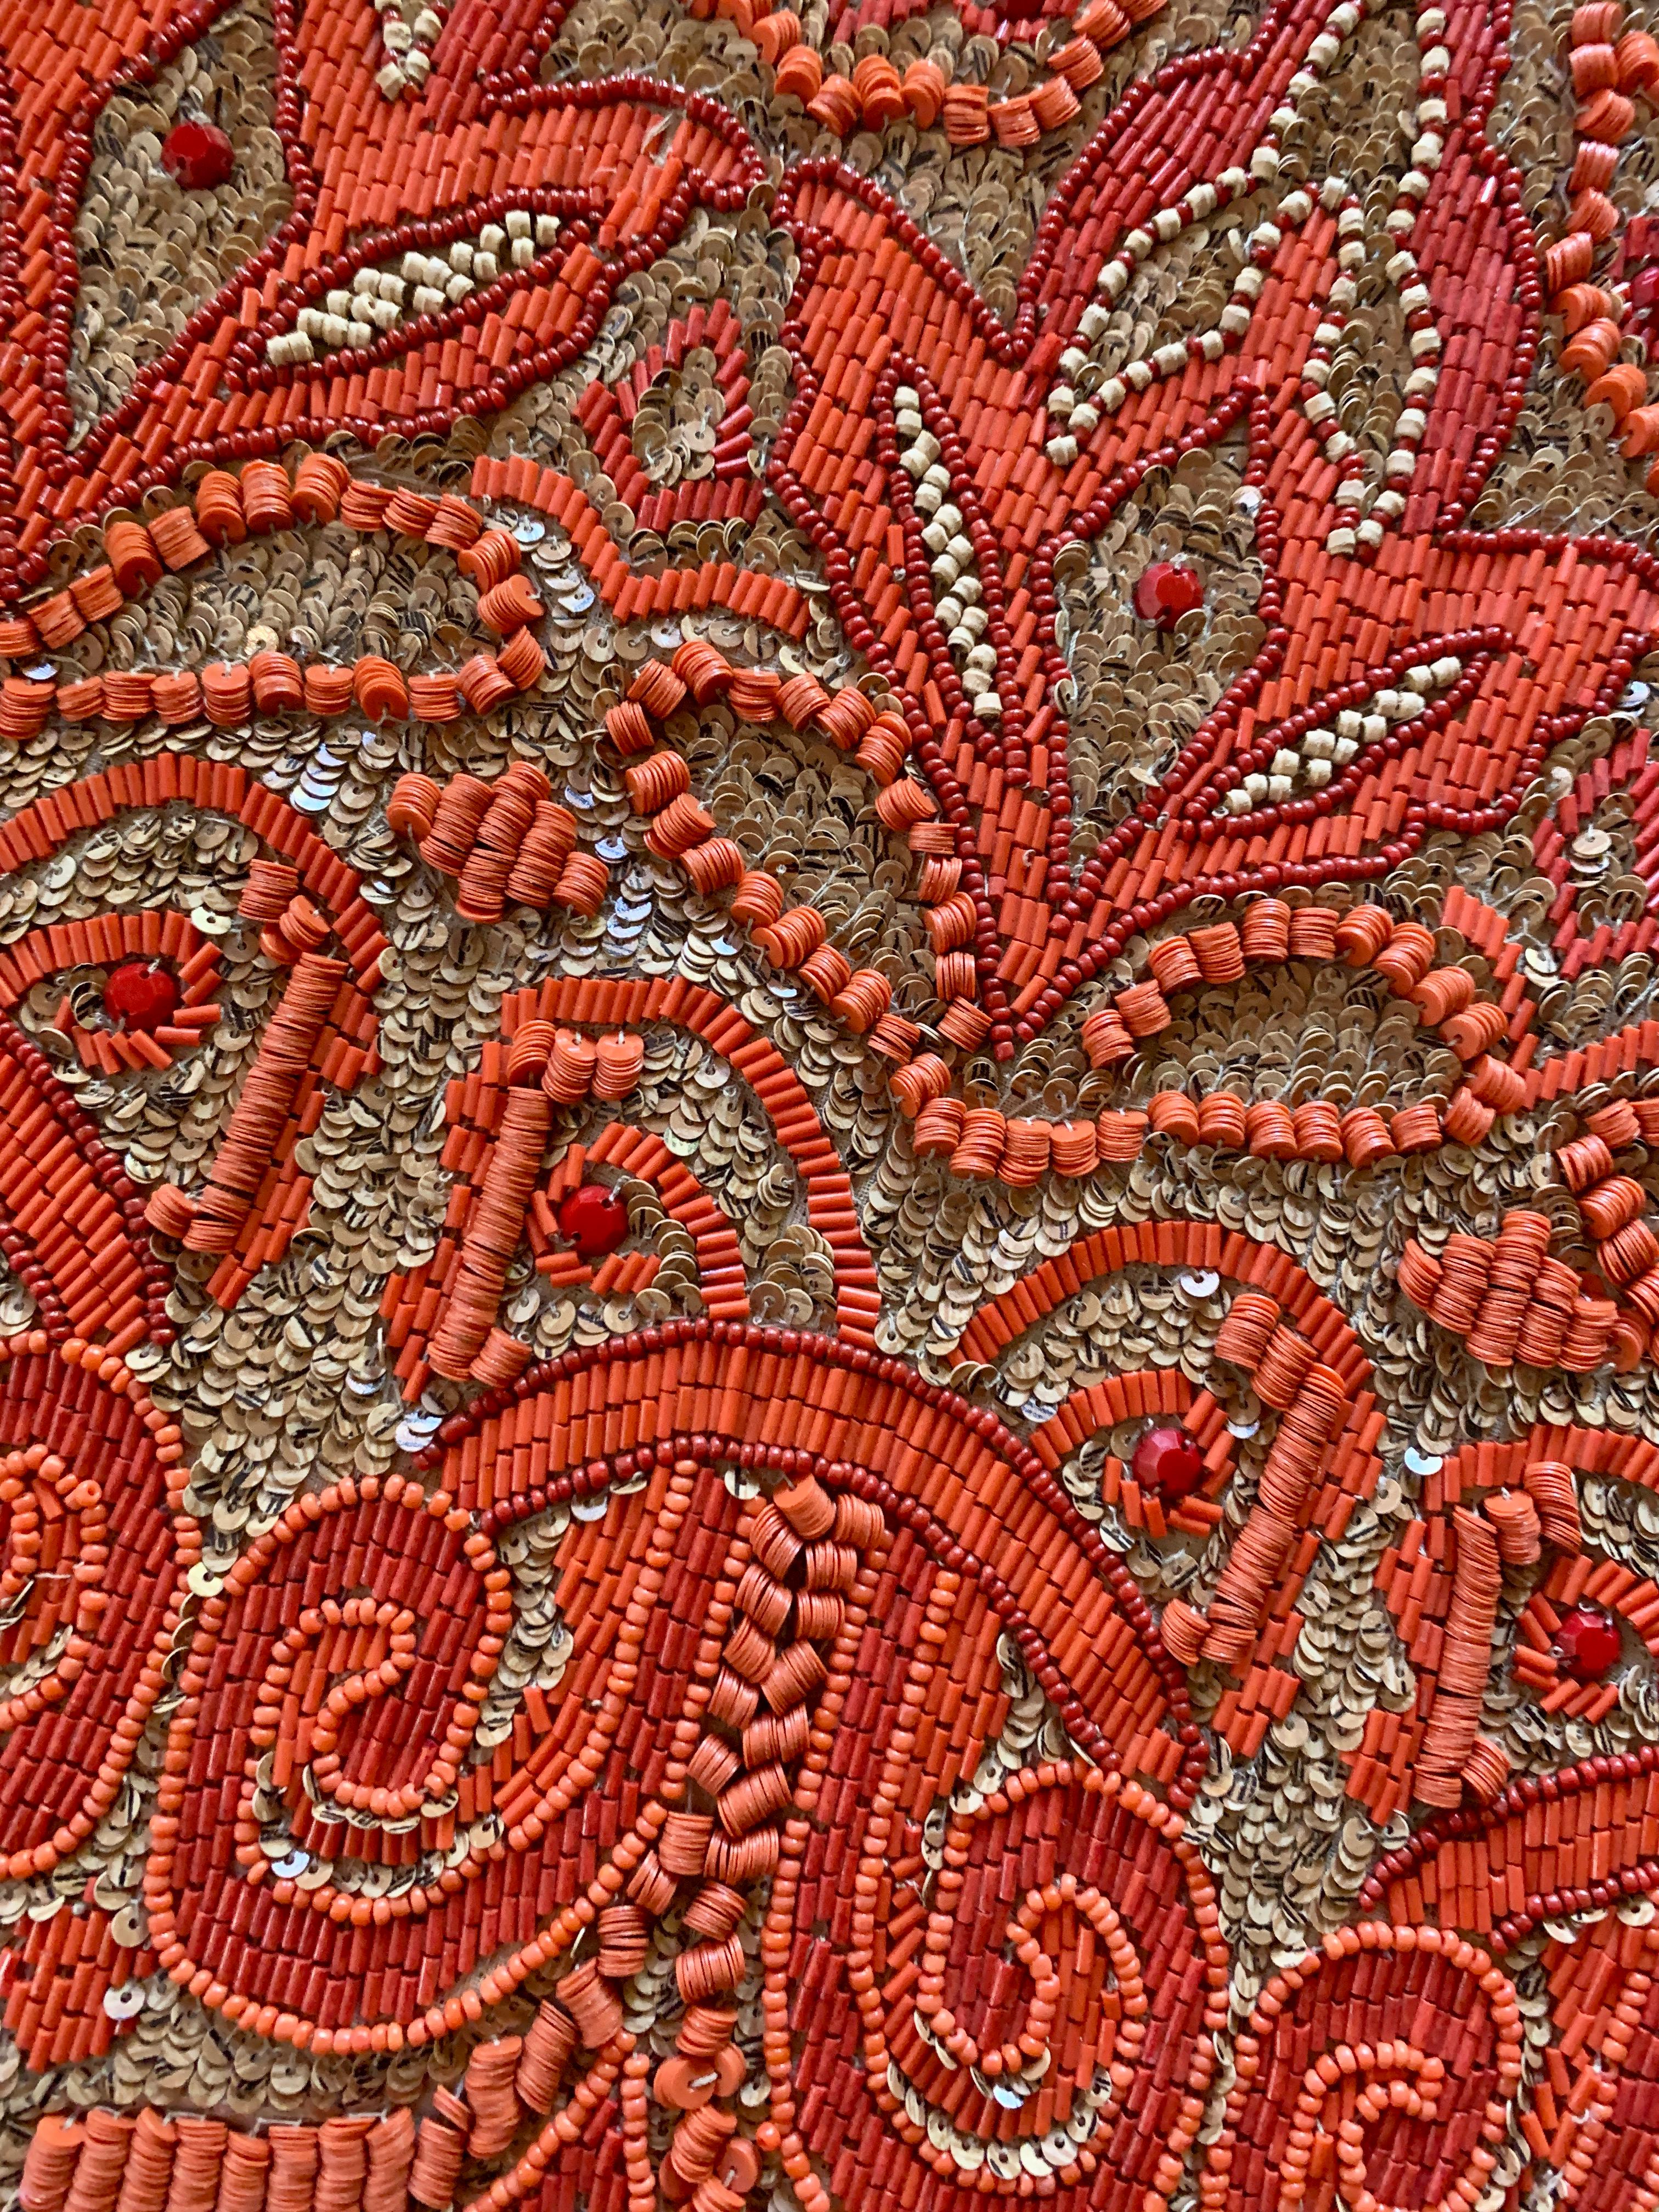 Set of two hand beaded placemats. The unique designed placemats are hand beaded with Glass, Wood and plastic beads - the shape is a departure from the standard oval or rectangular. Brilliant orange beads on a woven raffia field makes for the perfect